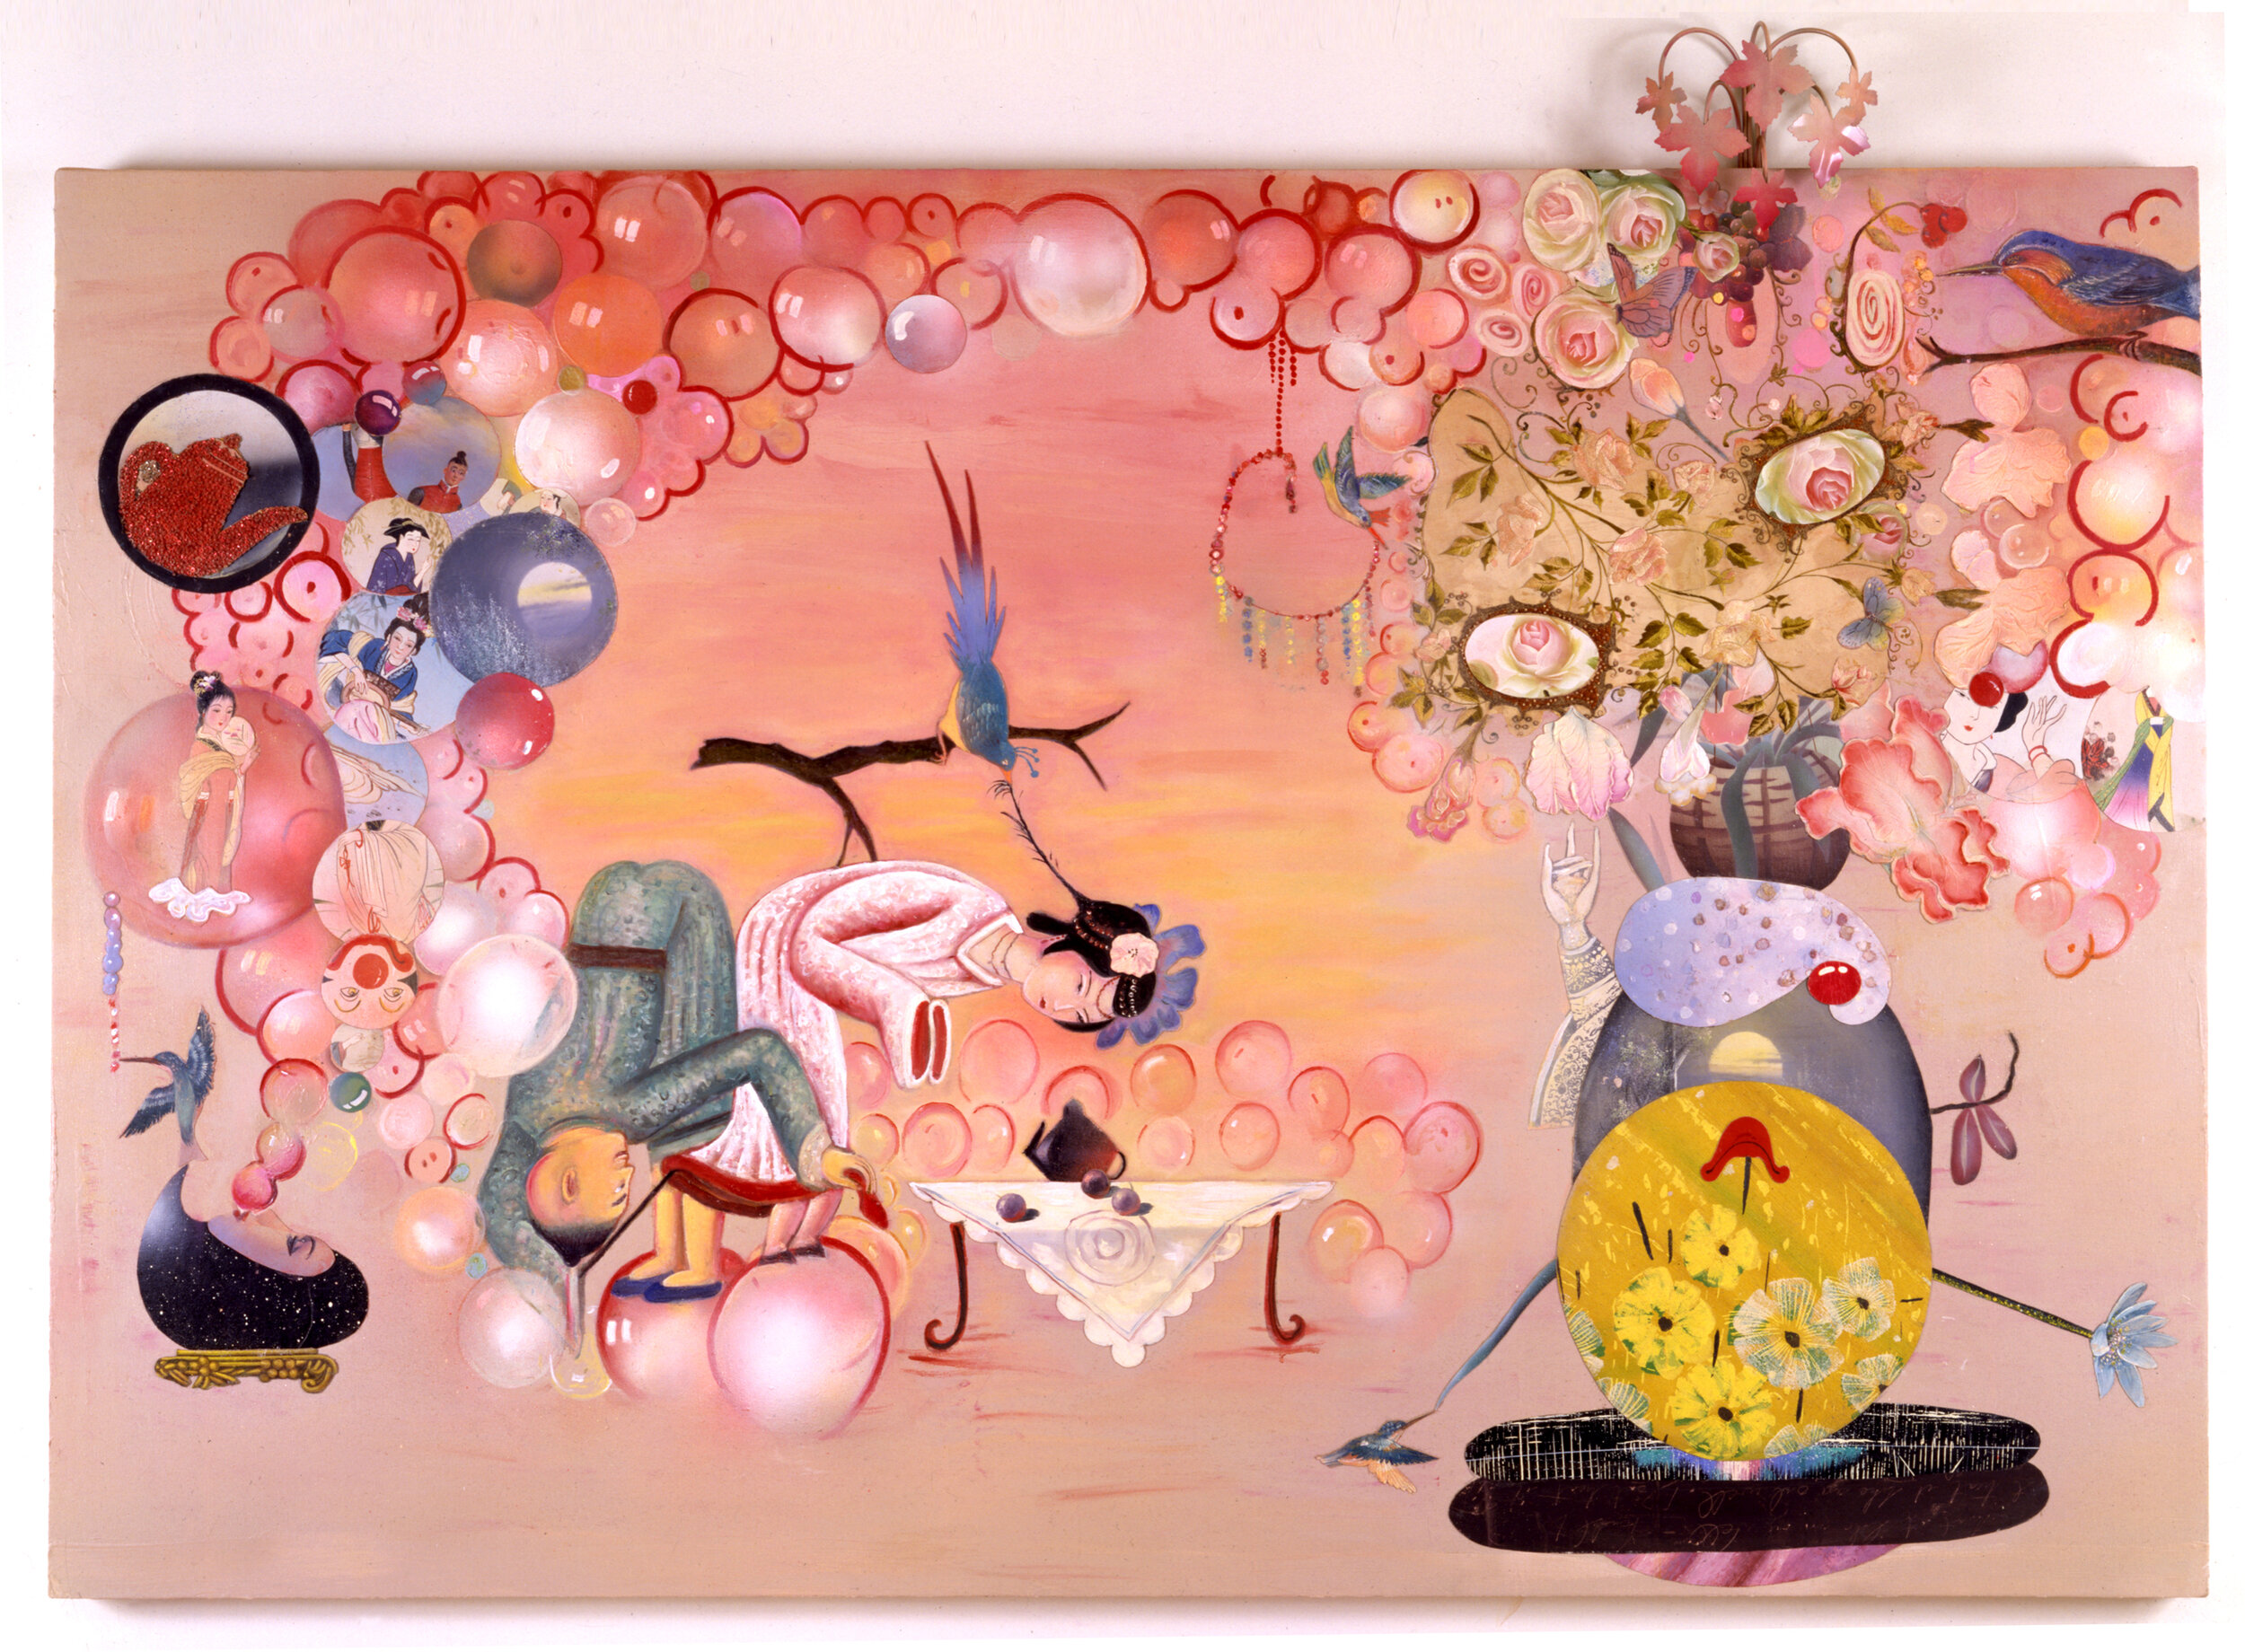 Idle Hours, 48" × 72", mixed media on canvas, 2000